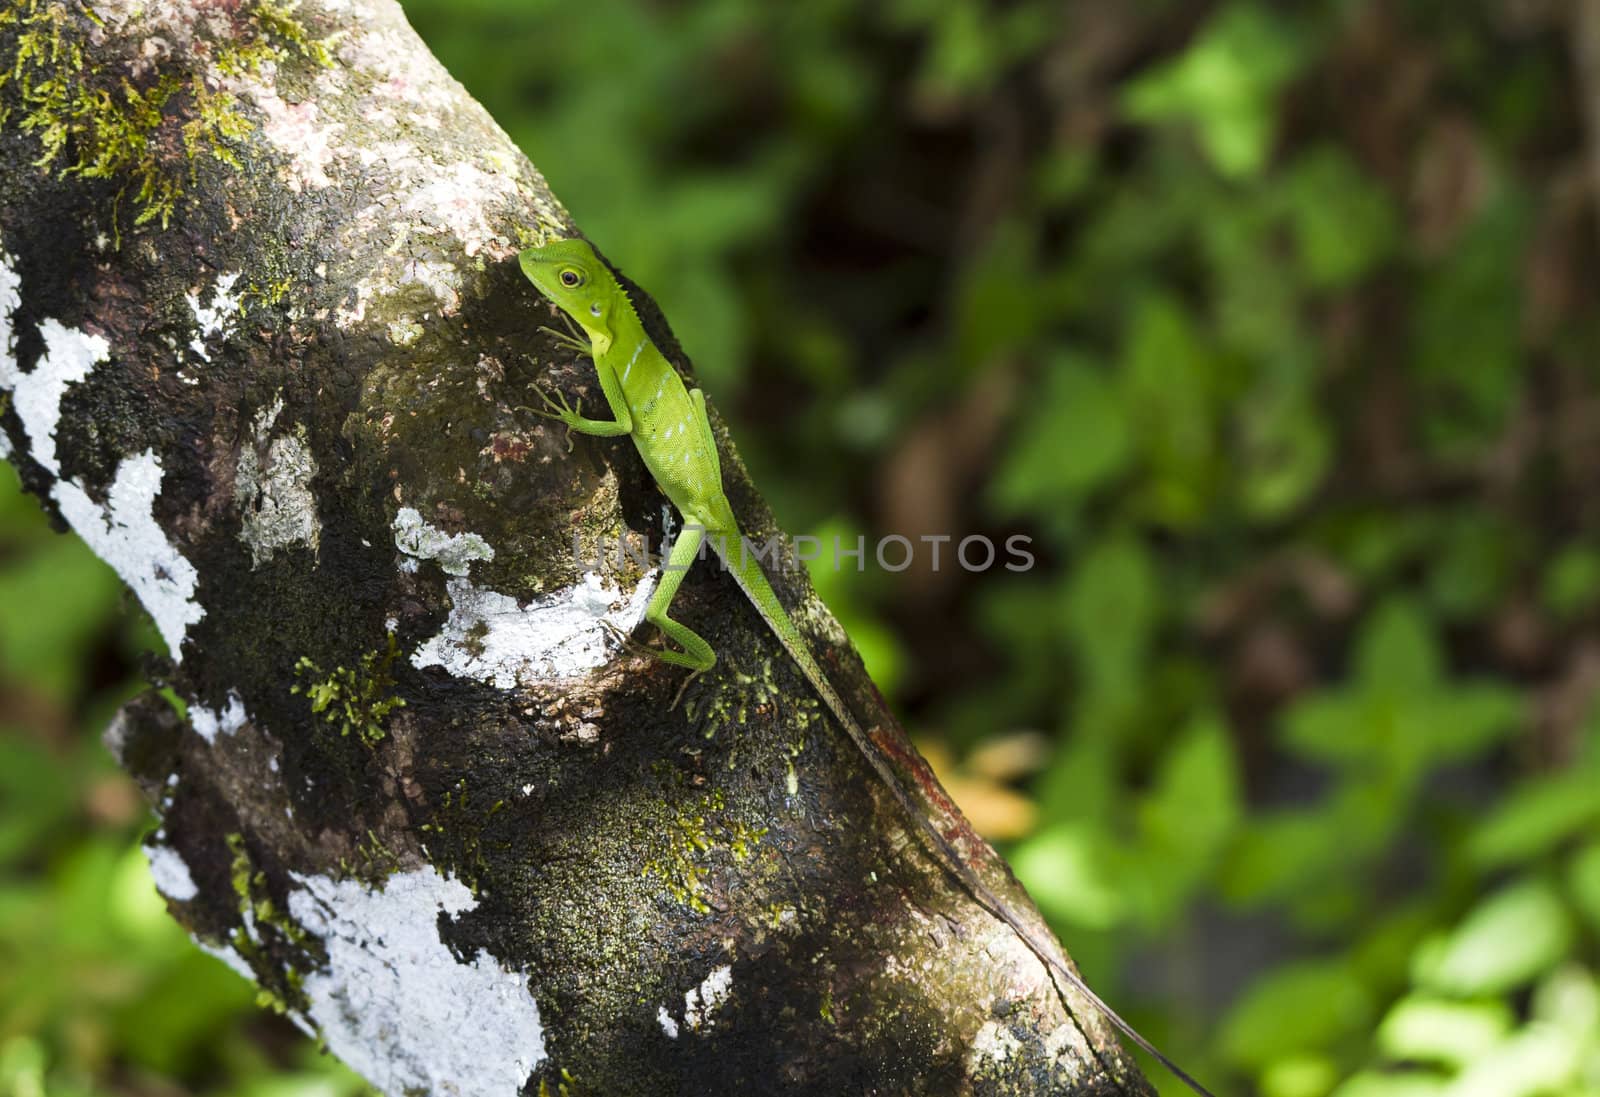 Green lizard on a tree bark with blurry background